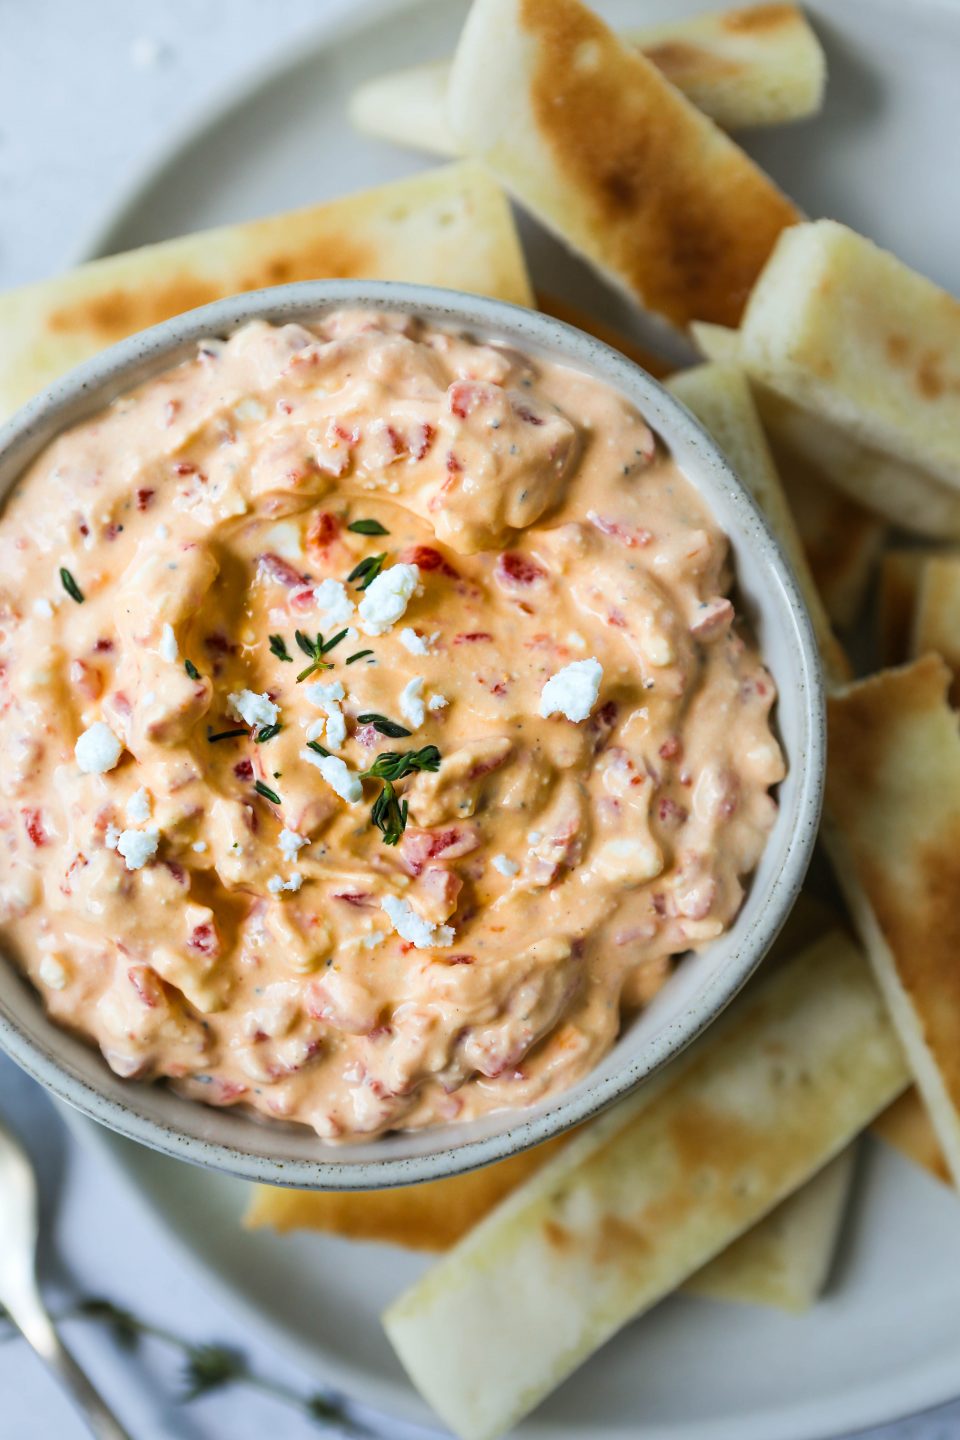 An overhead photo of roasted red pepper and feta dip in a gray bowl, on a gray plate with a cement background. Slices of toasted pita bread are scattered around.